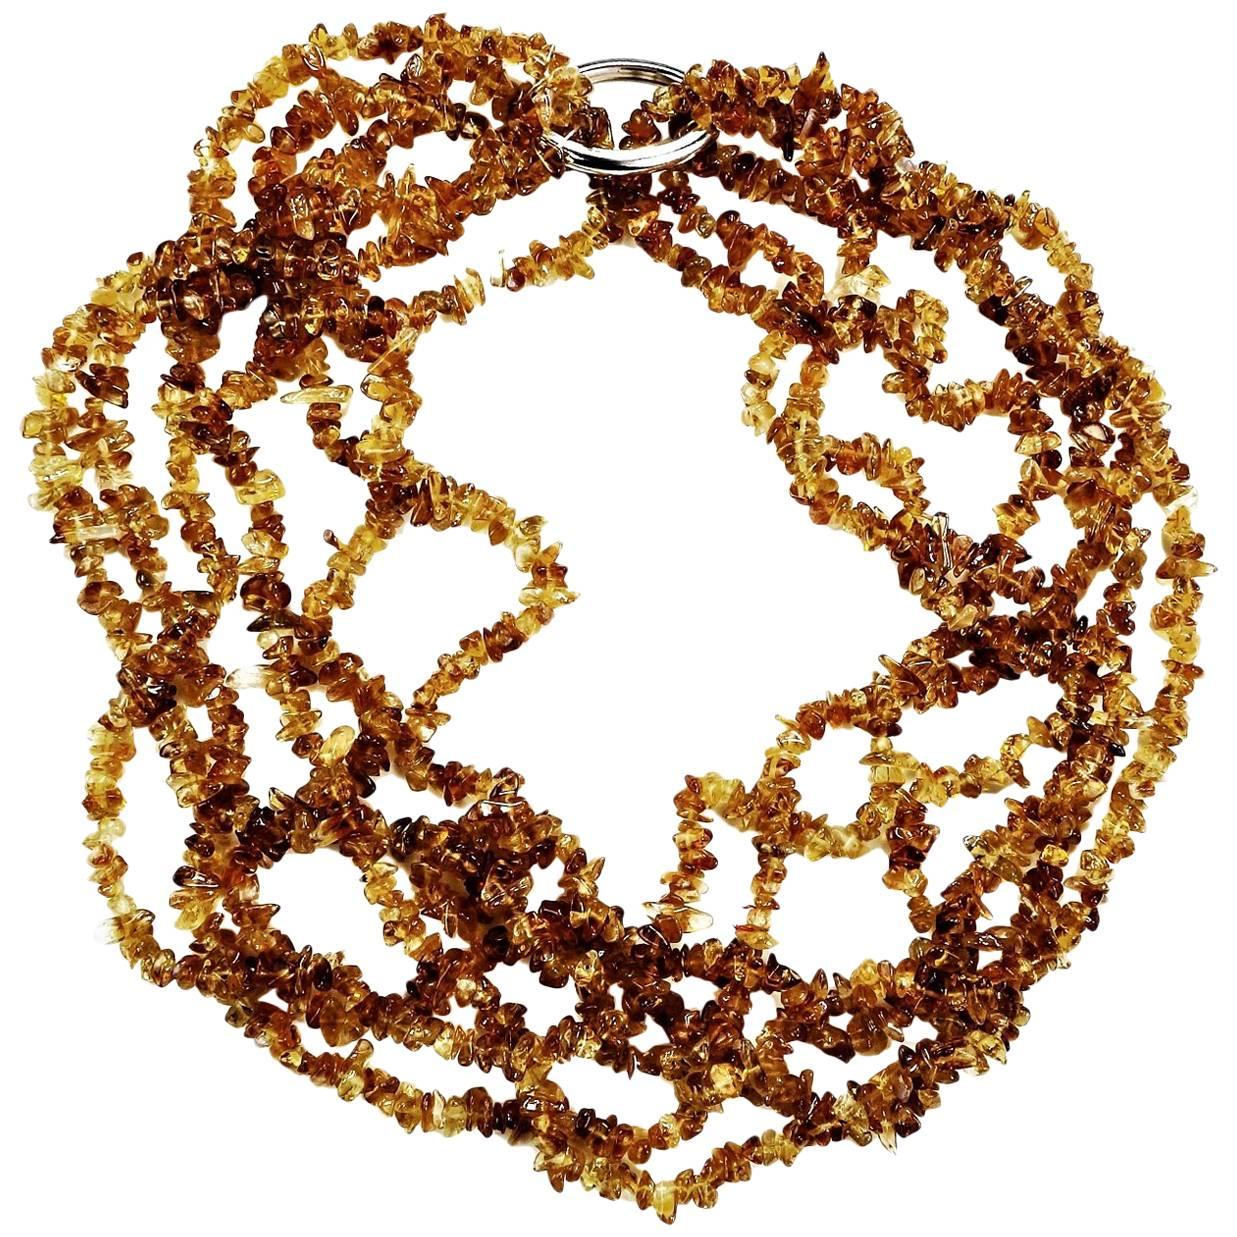 Three 36 inch; strands of honey colored tumbled citrine chips with a gold tone clasp. 
You can wear these long and swinging or tie a knot in them. You can double and twist and clasp to make a six-strand choker. However, you wish to wear them, these